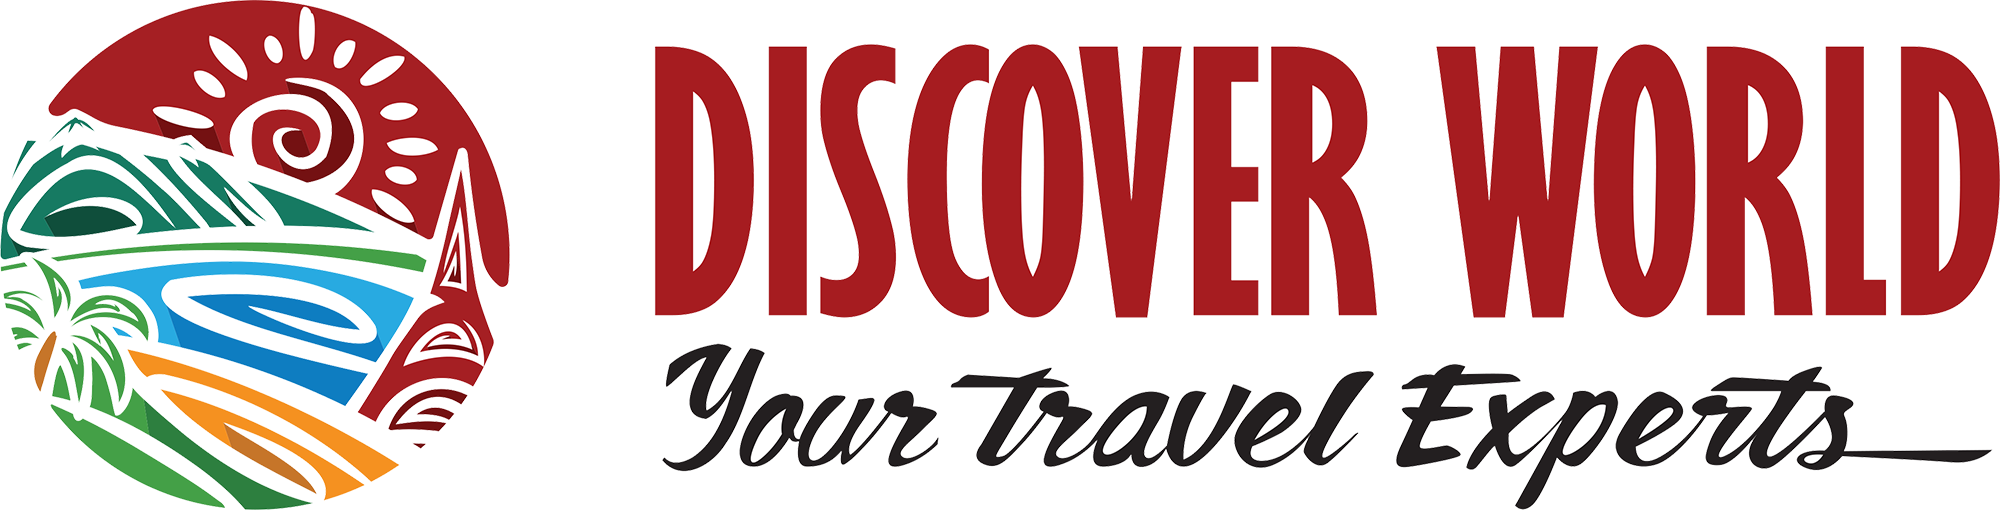 Discover World | Your Travel Experts